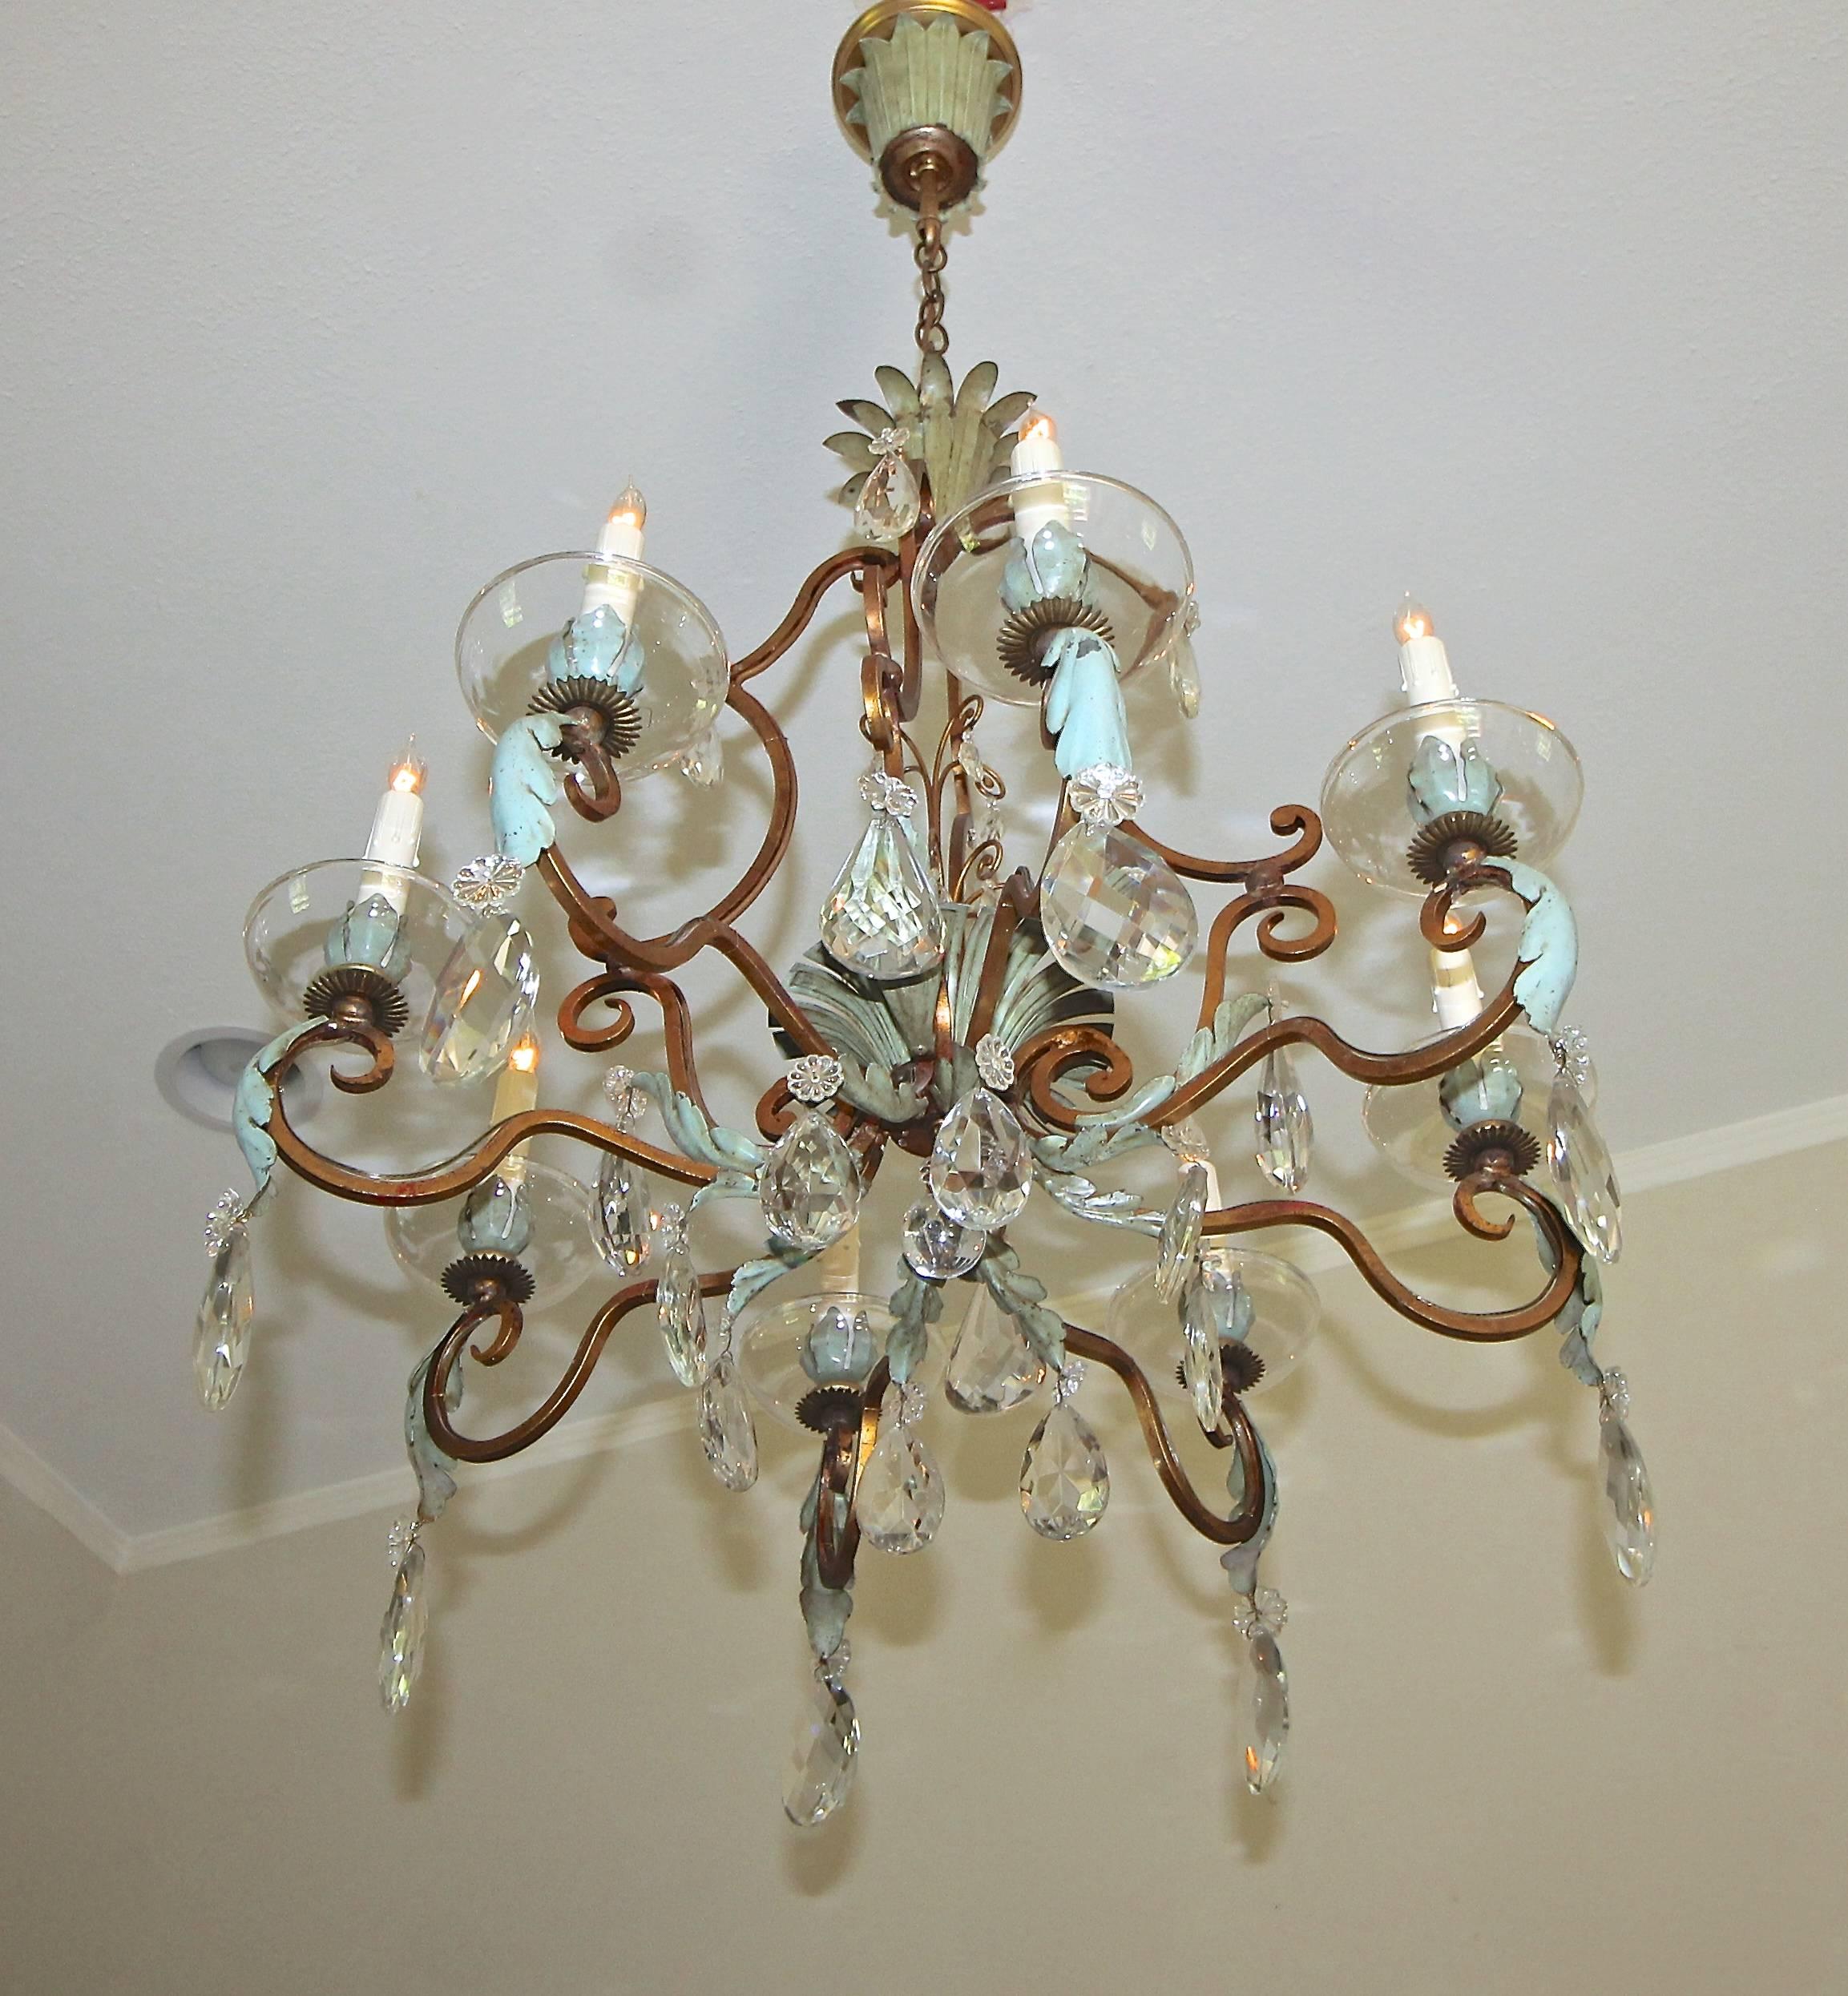 Outstanding French 1920s gilt iron and cut crystal chandelier with painted tole details. Beautiful cage form with 8 arms and scroll work in the French Art Deco style. Wonderful overall detailing and patina in the original finish. Chandelier uses